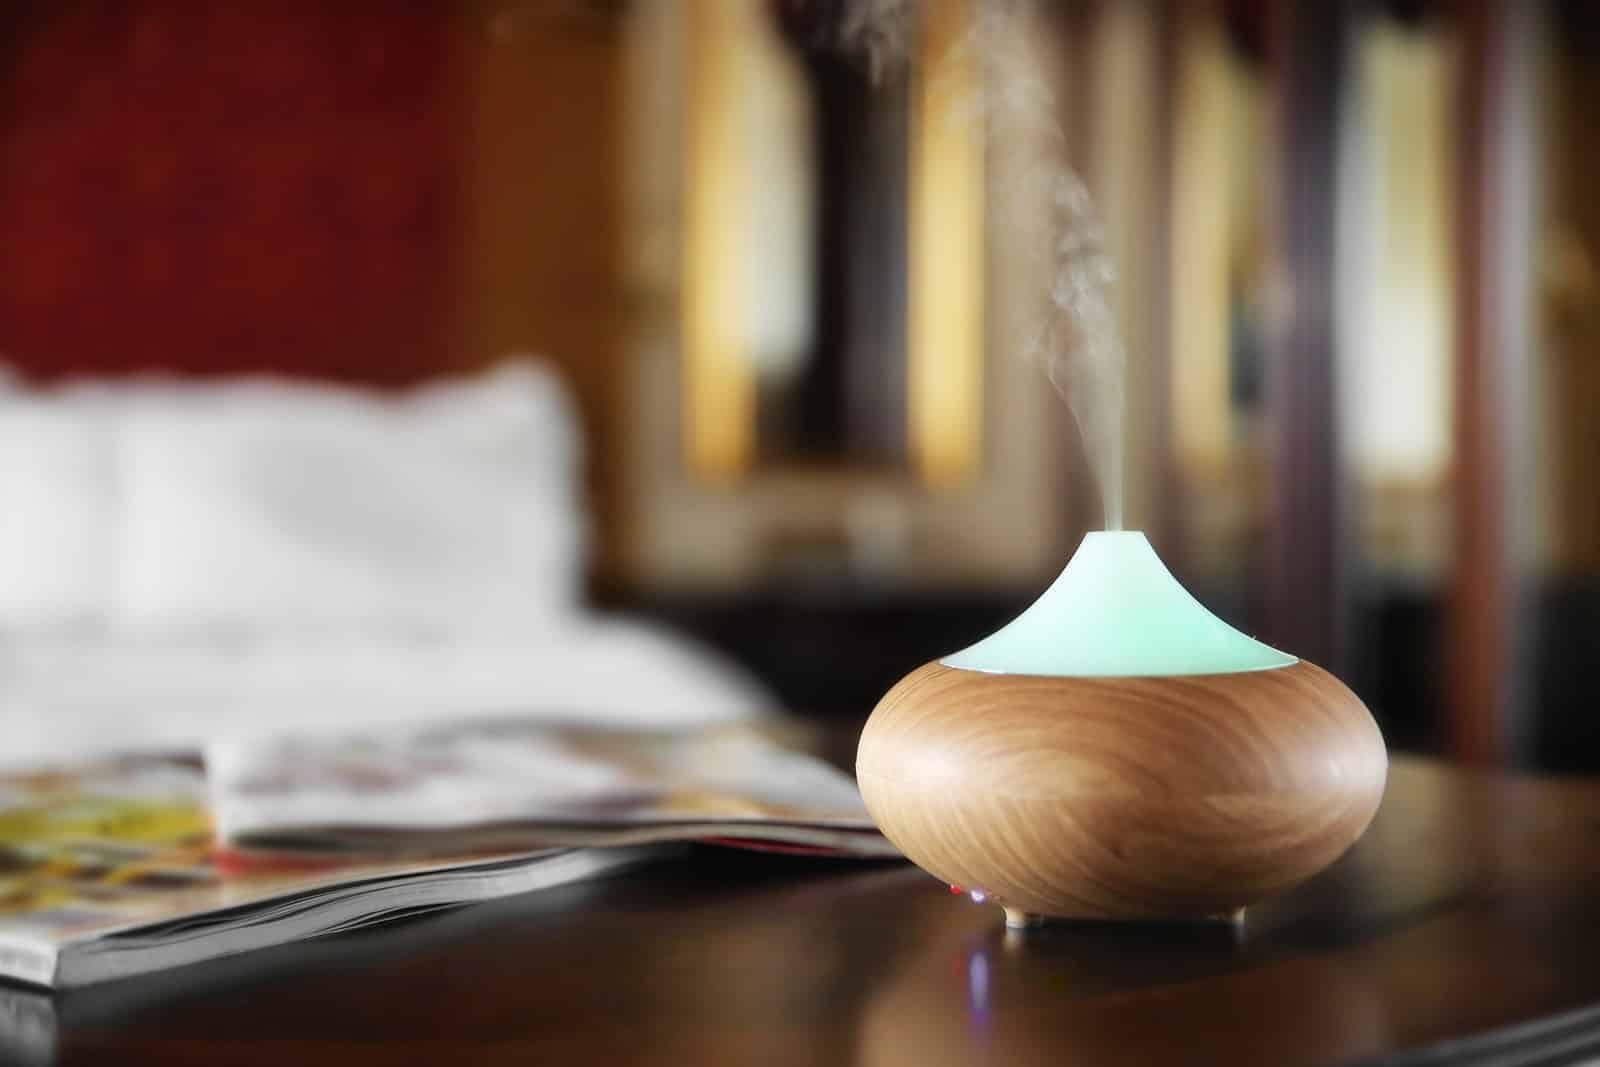 Small Humidifier For Bedroom
 The Best Humidifier for Bedroom – Reviews and Top Picks